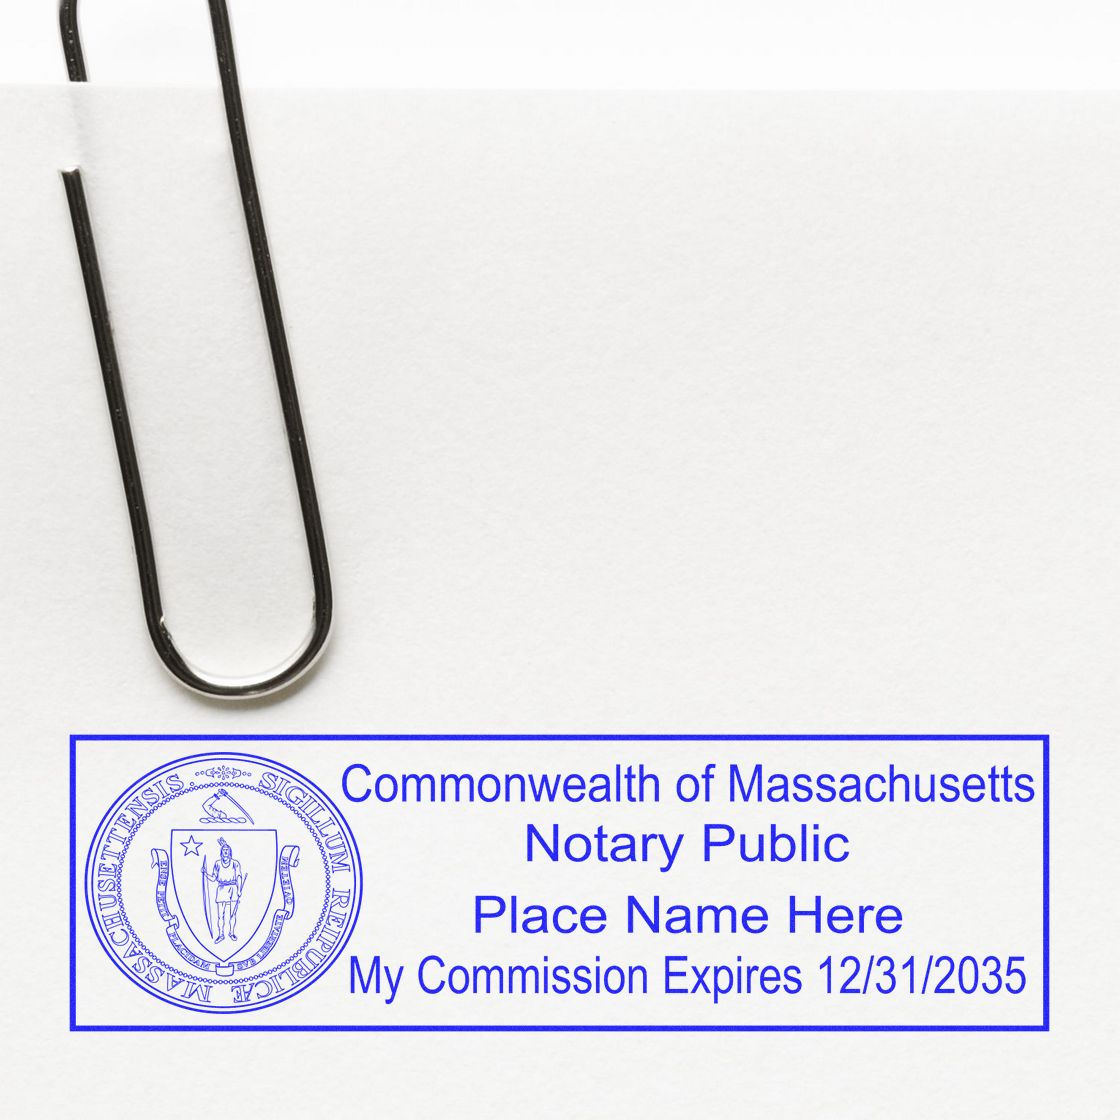 An alternative view of the PSI Massachusetts Notary Stamp stamped on a sheet of paper showing the image in use